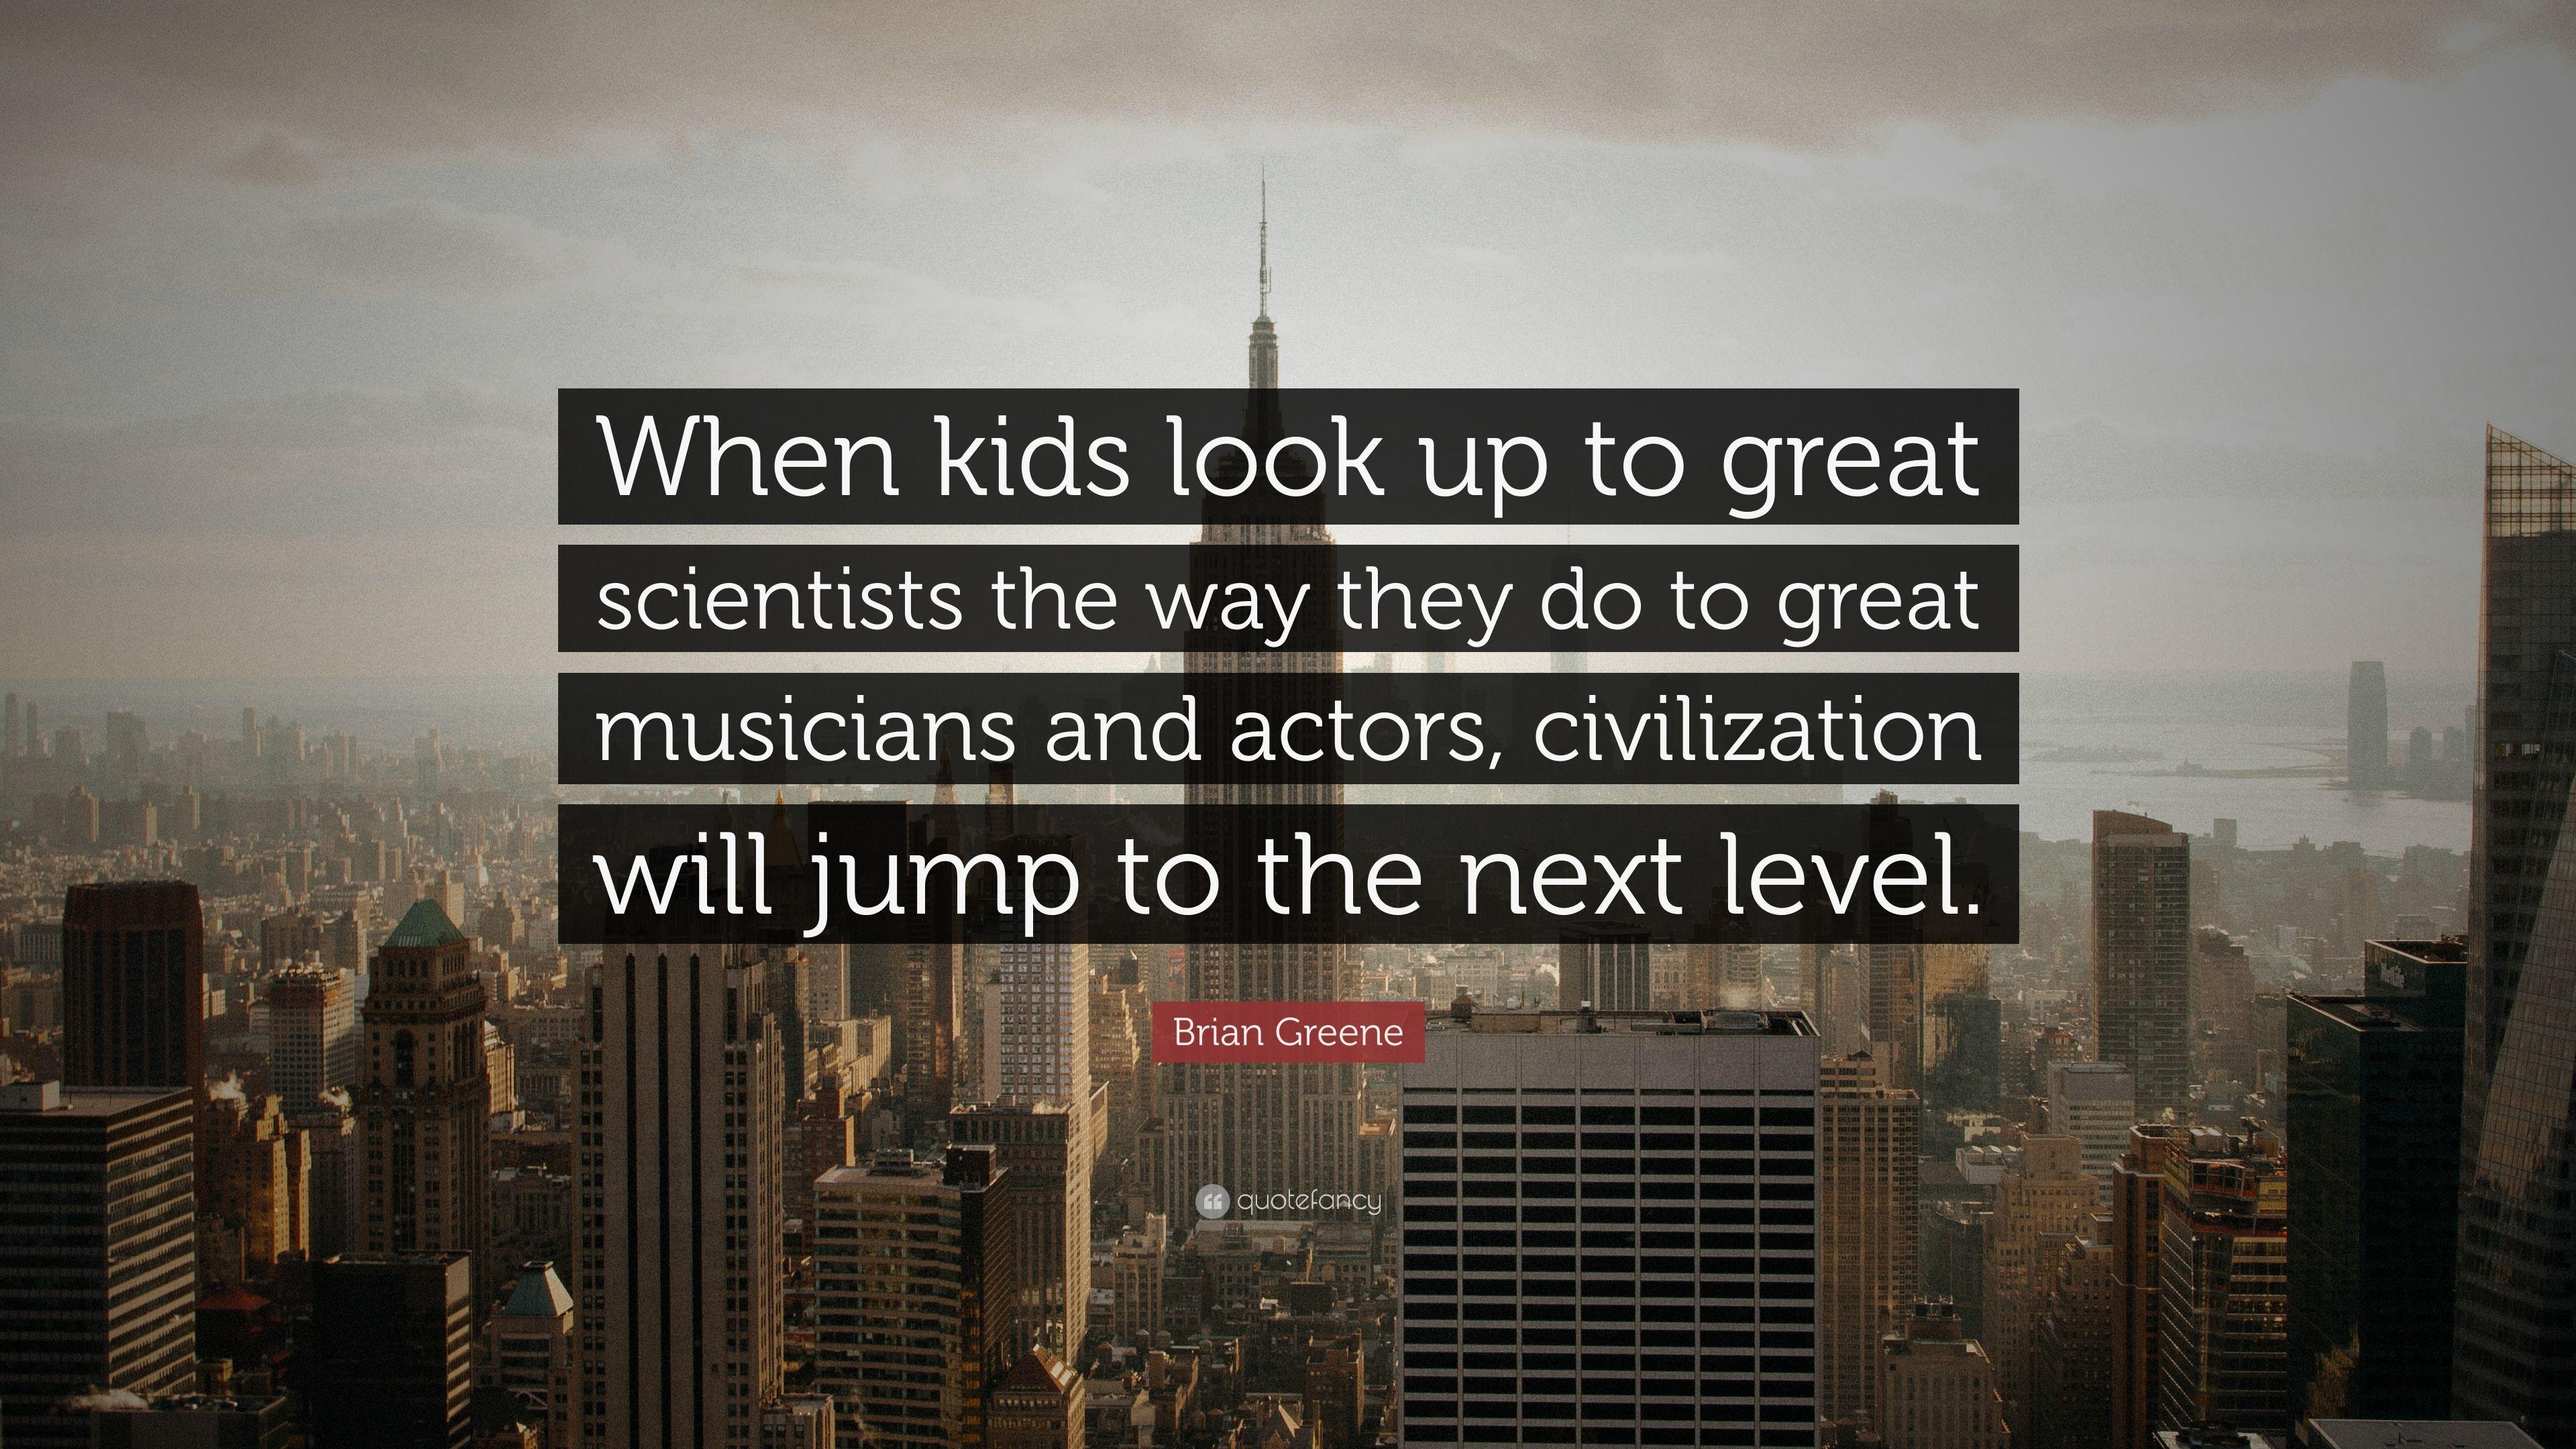 Brian Greene Quote: “When kids look up to great scientists the way